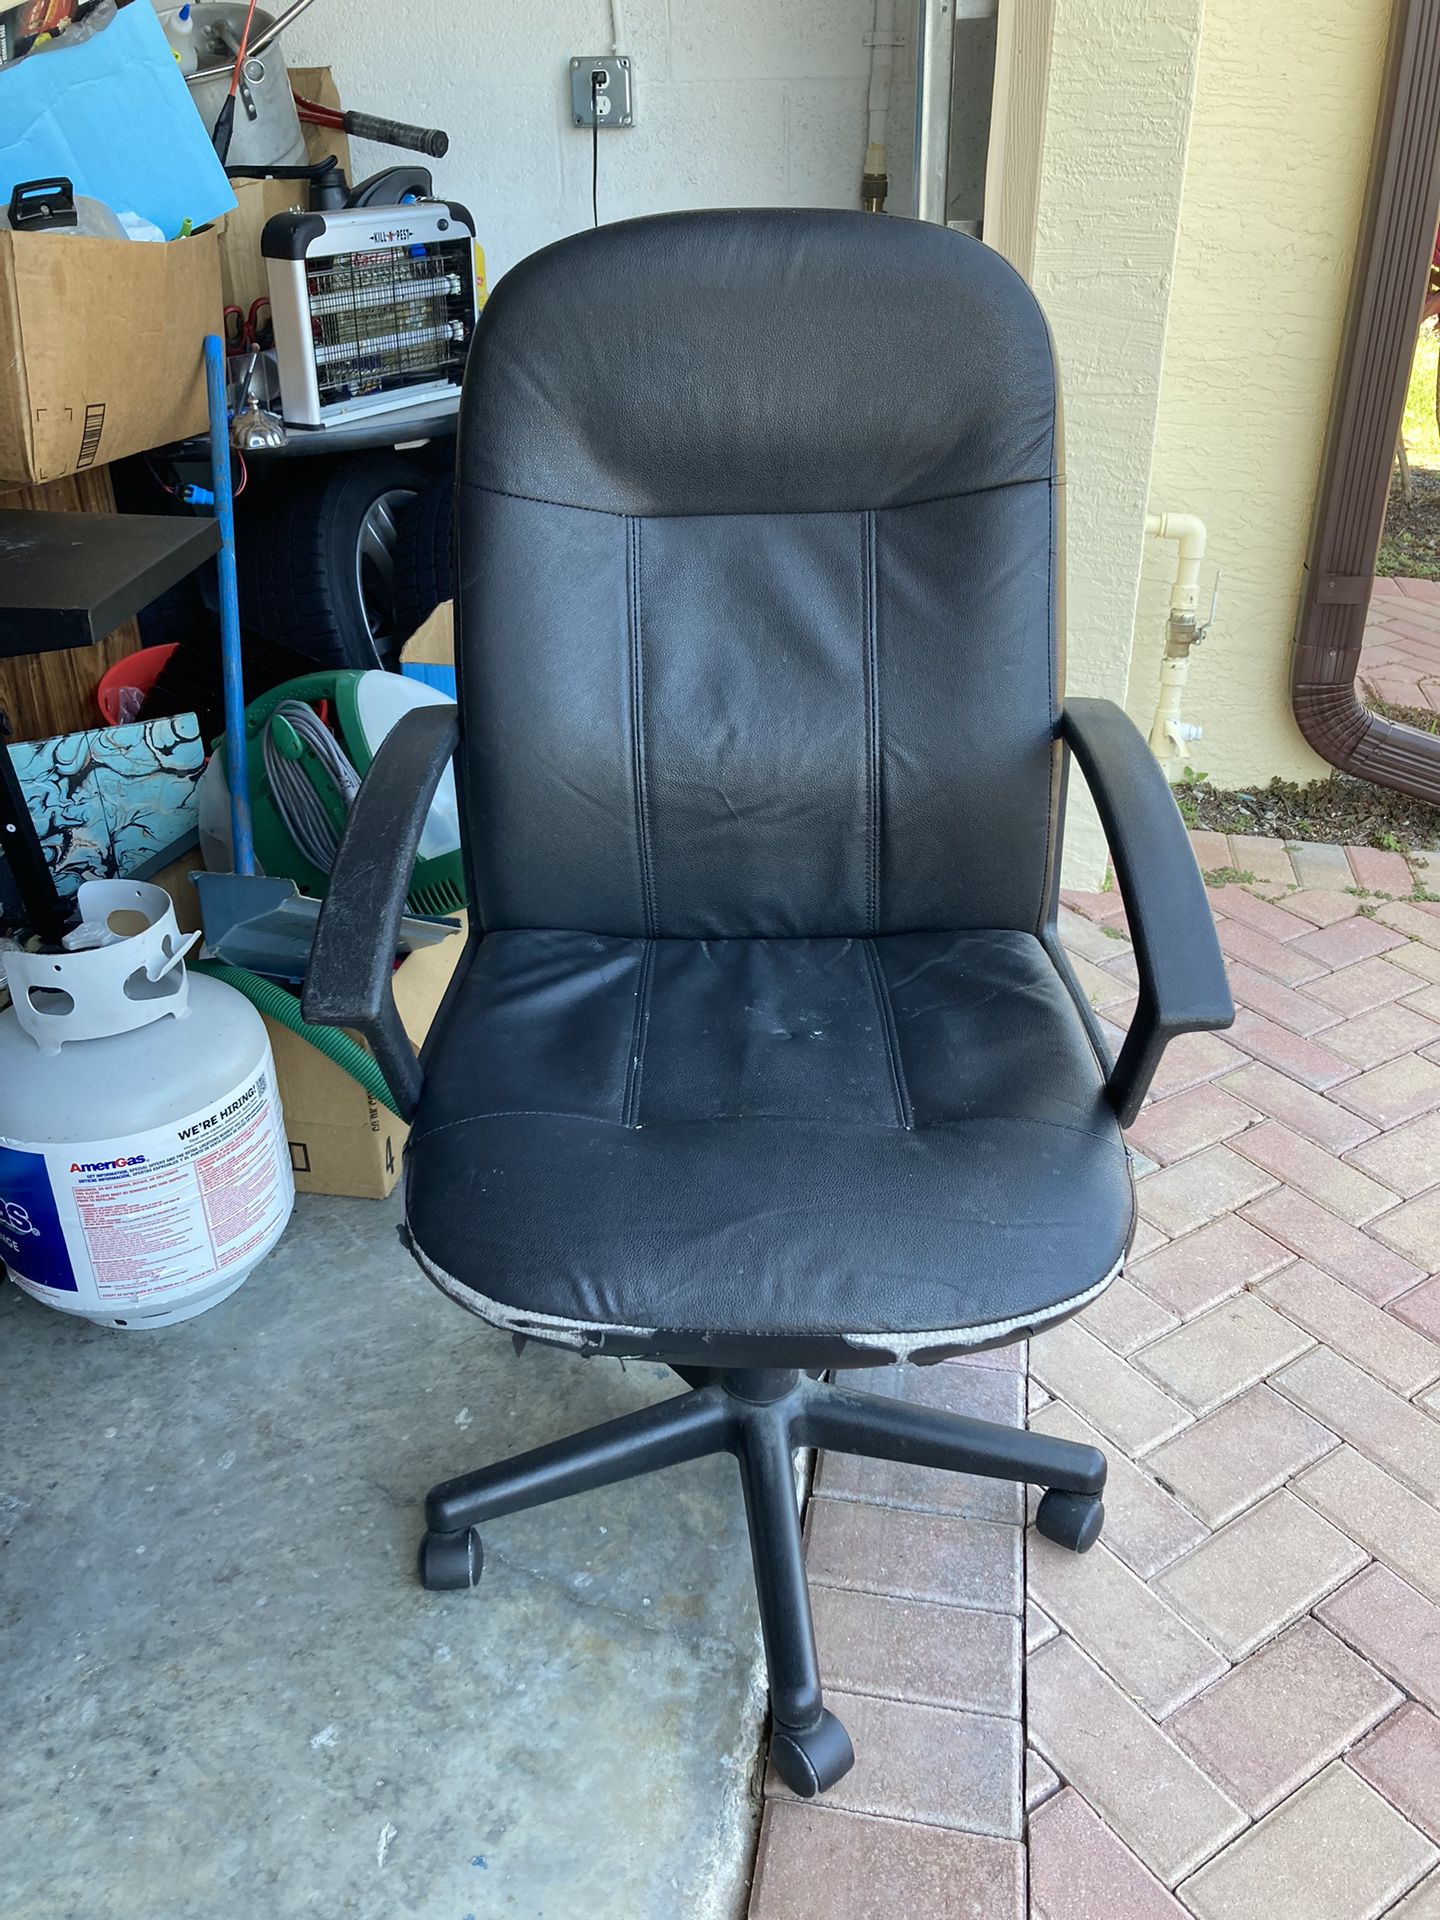 Huge Size Computer Chair For $15